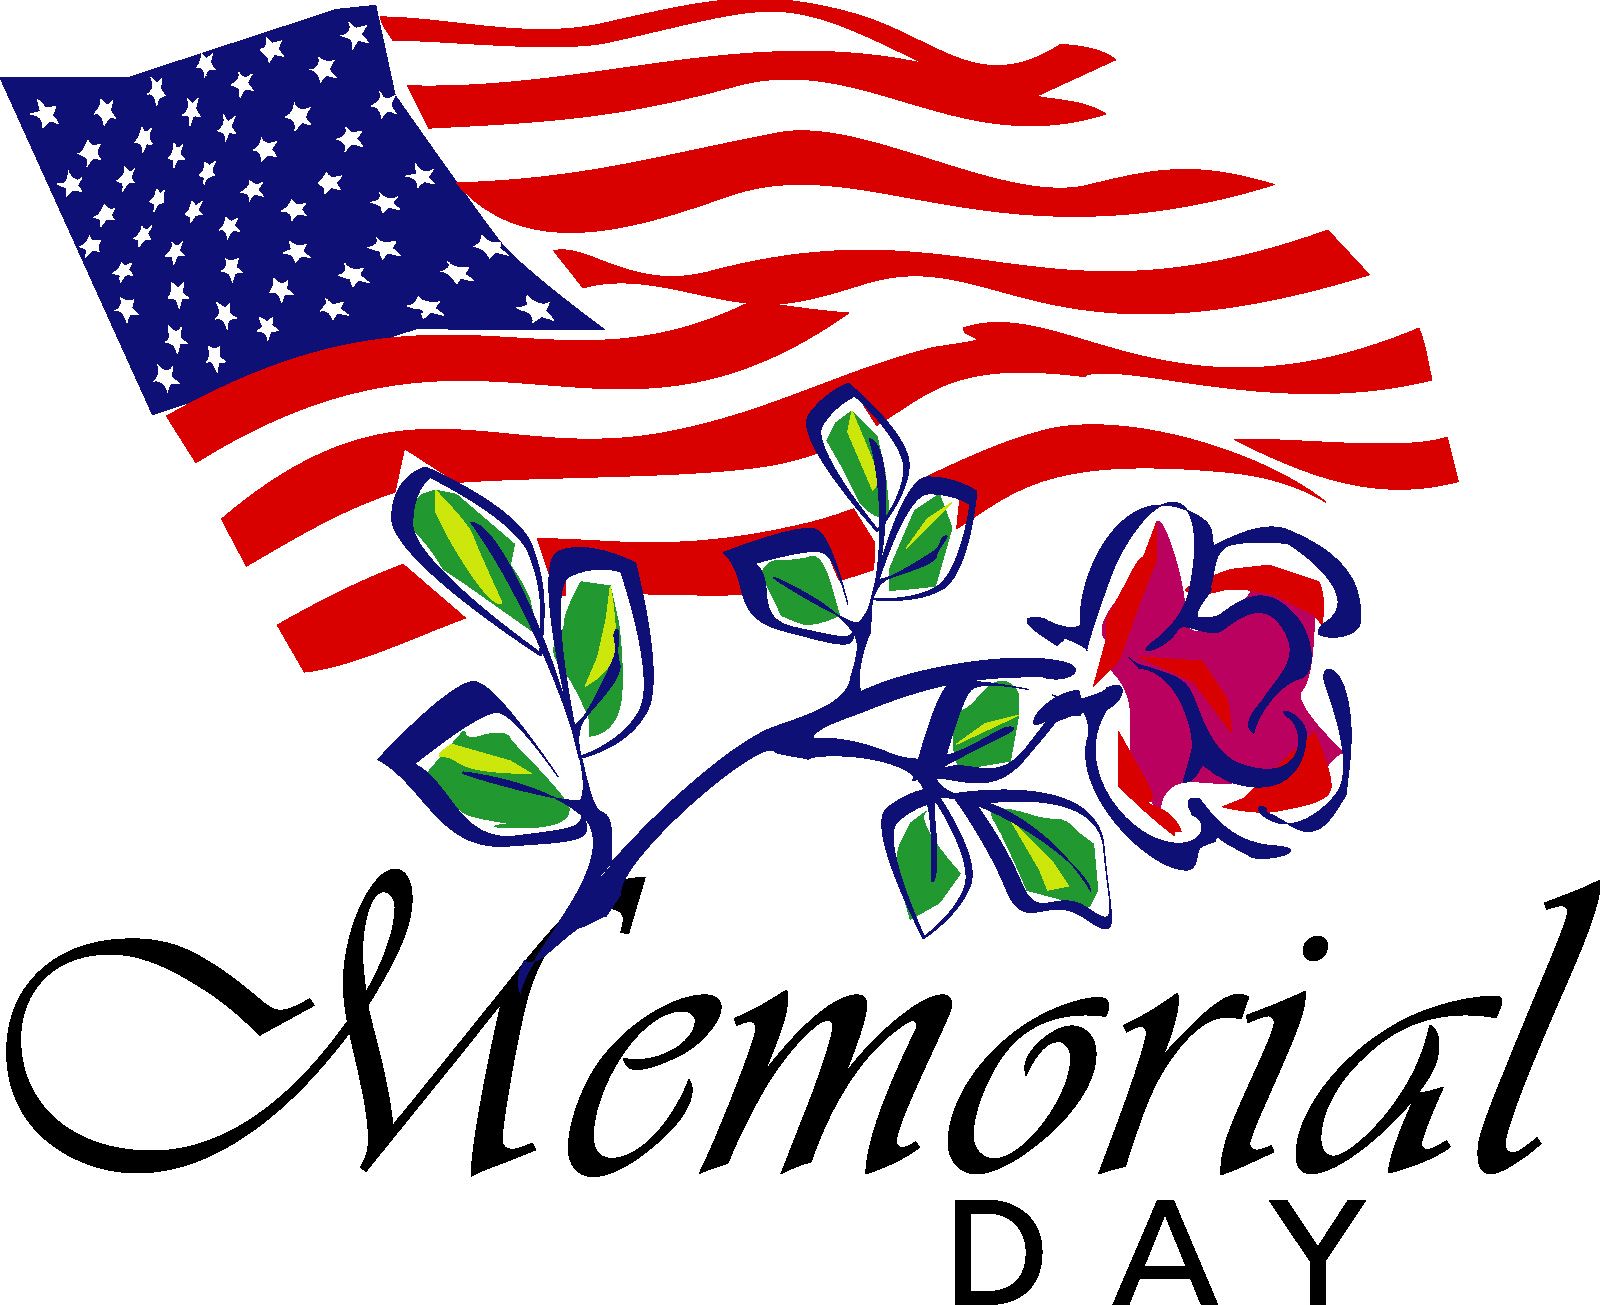 ᐅ Memorial Day Image 2021. Memorial Day Picture, Photo, HD Wallpaper, Clipart, Pics Free Download Collection of Wishes, Messages, Greetings, Text Messages for all Occasion or Festival